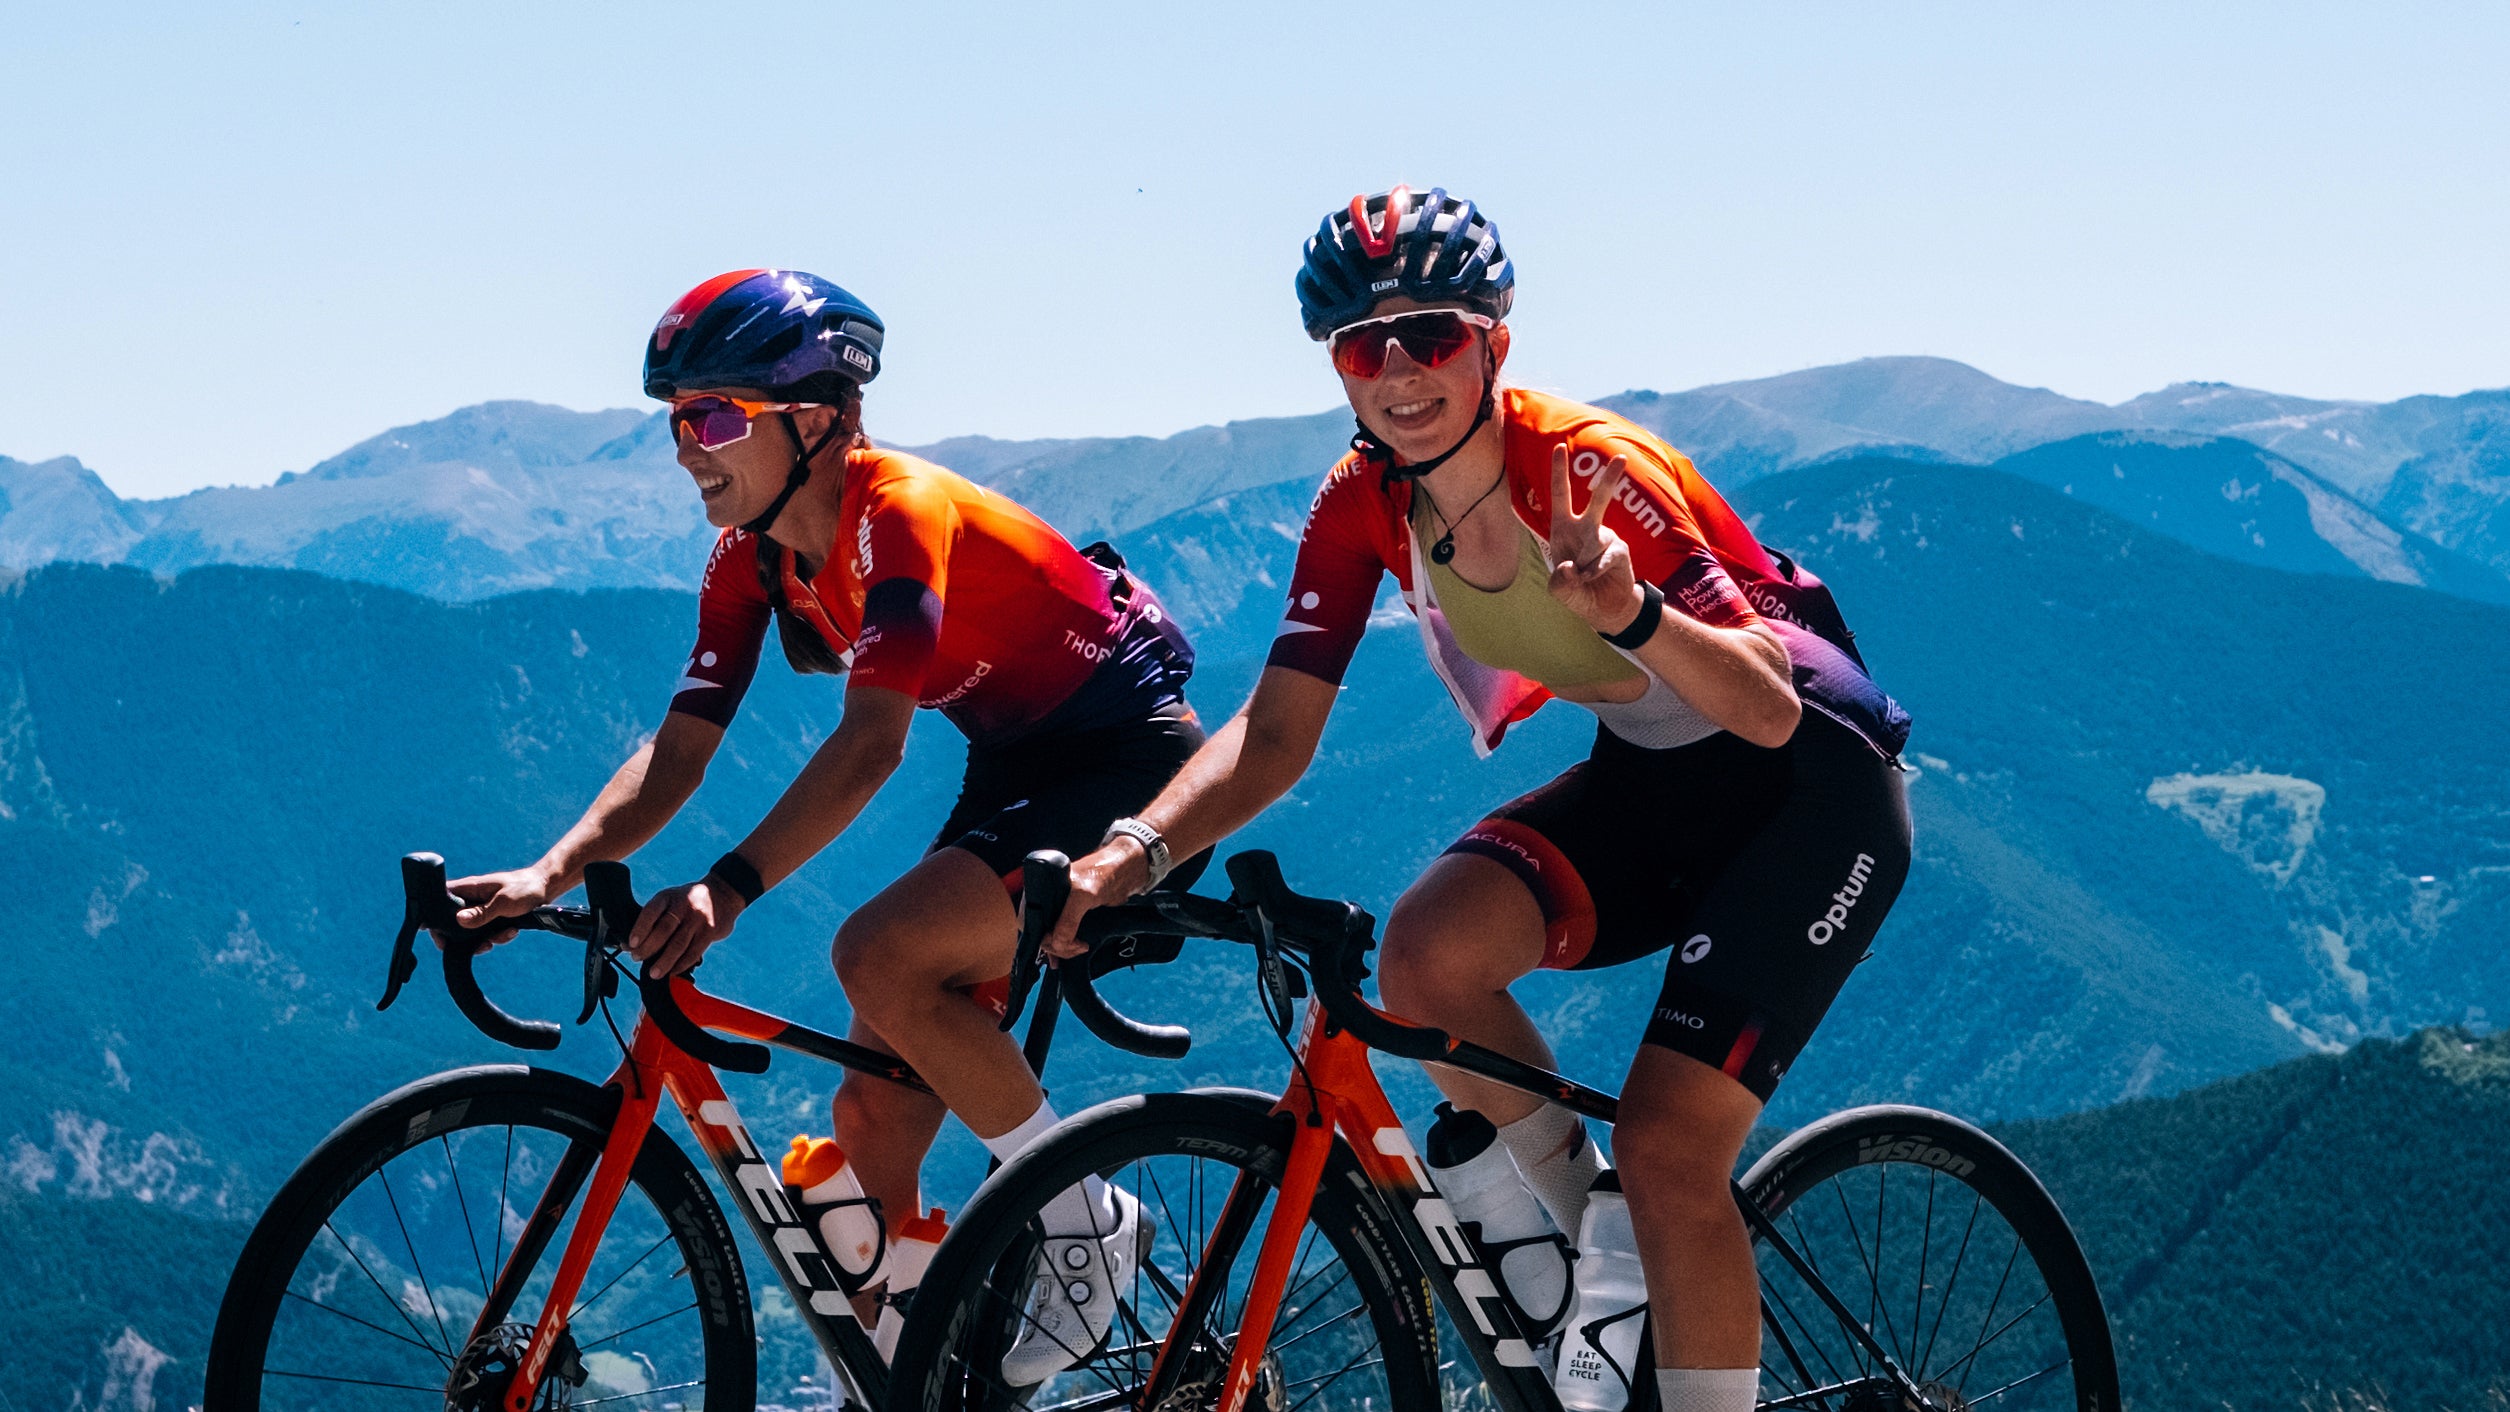 Why I’m Excited to Race the Women’s Tour de France